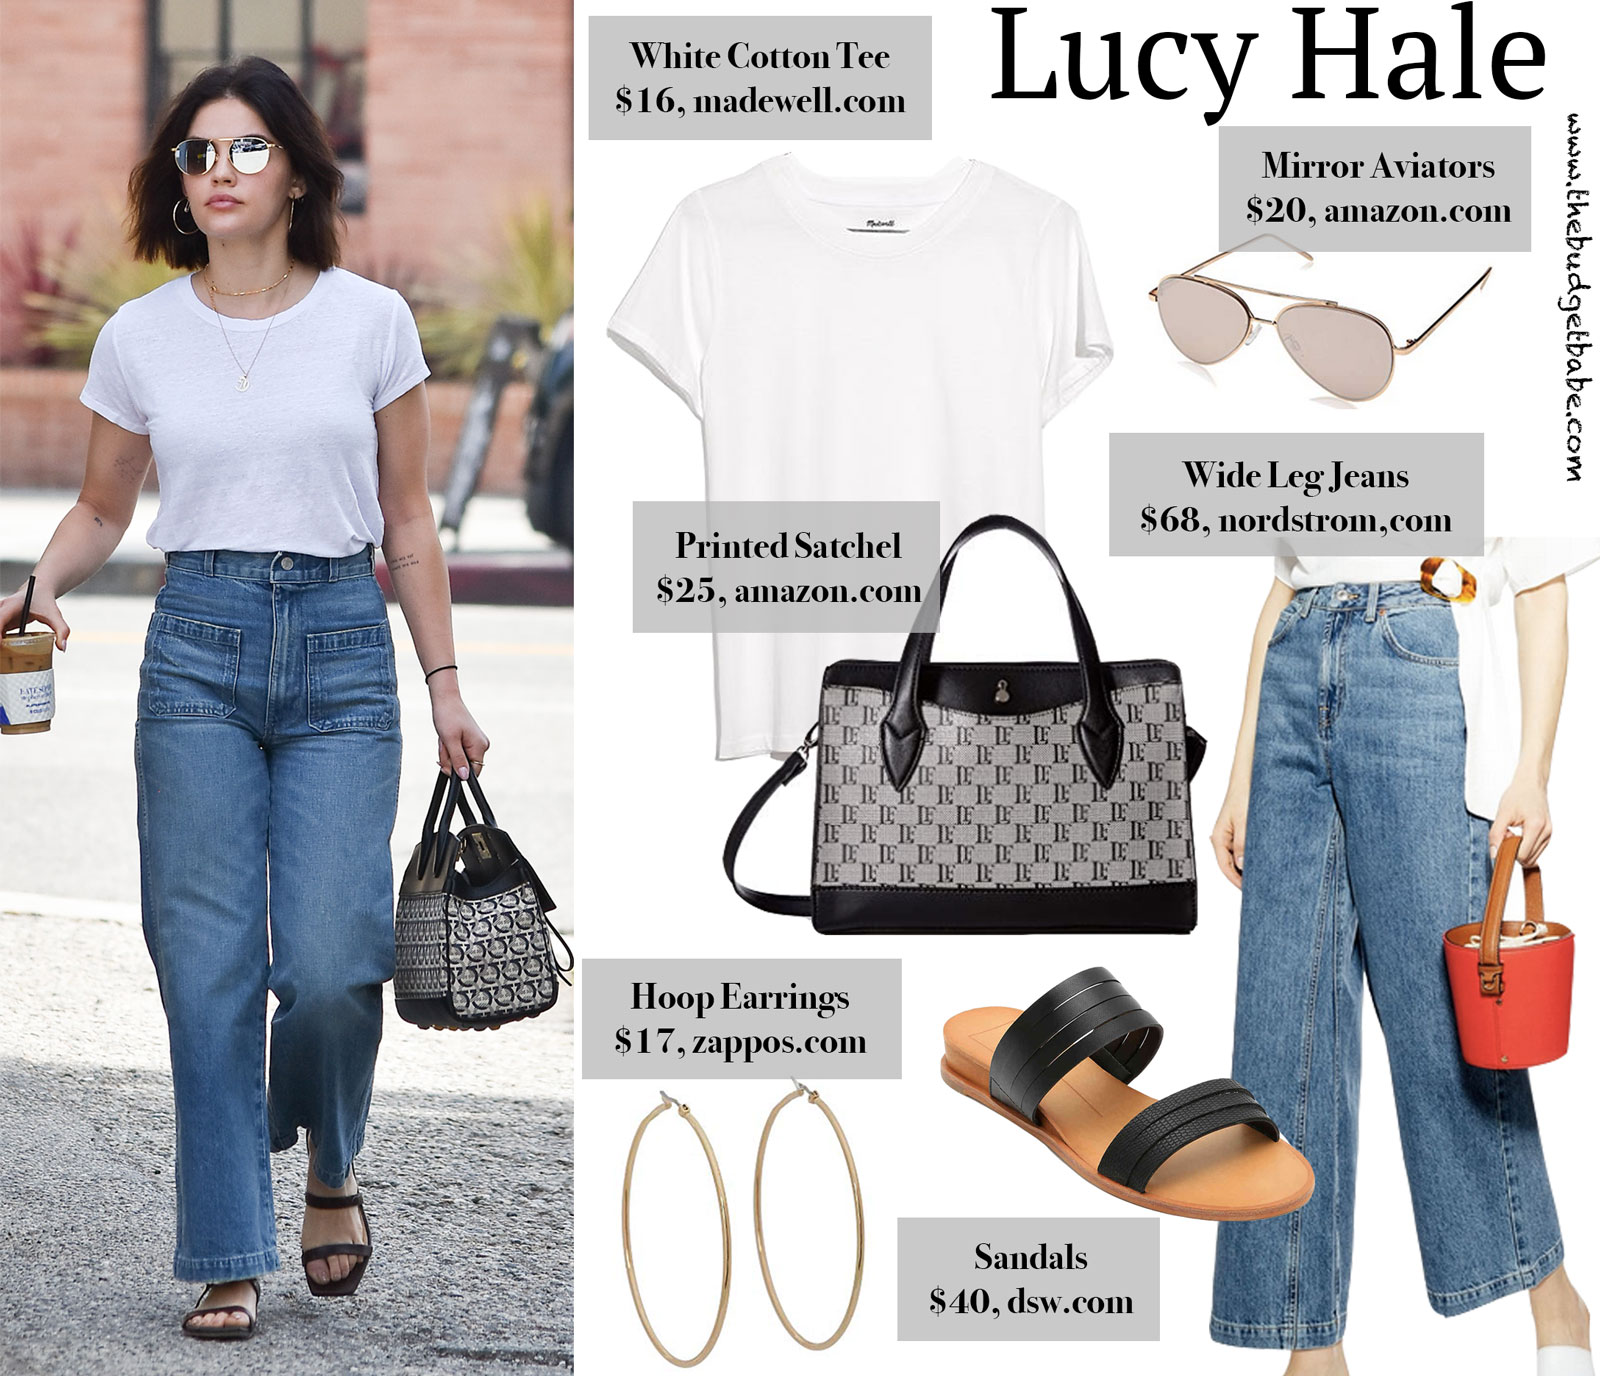 Lucy Hale White Tee and Wide Leg Jeans Look for Less